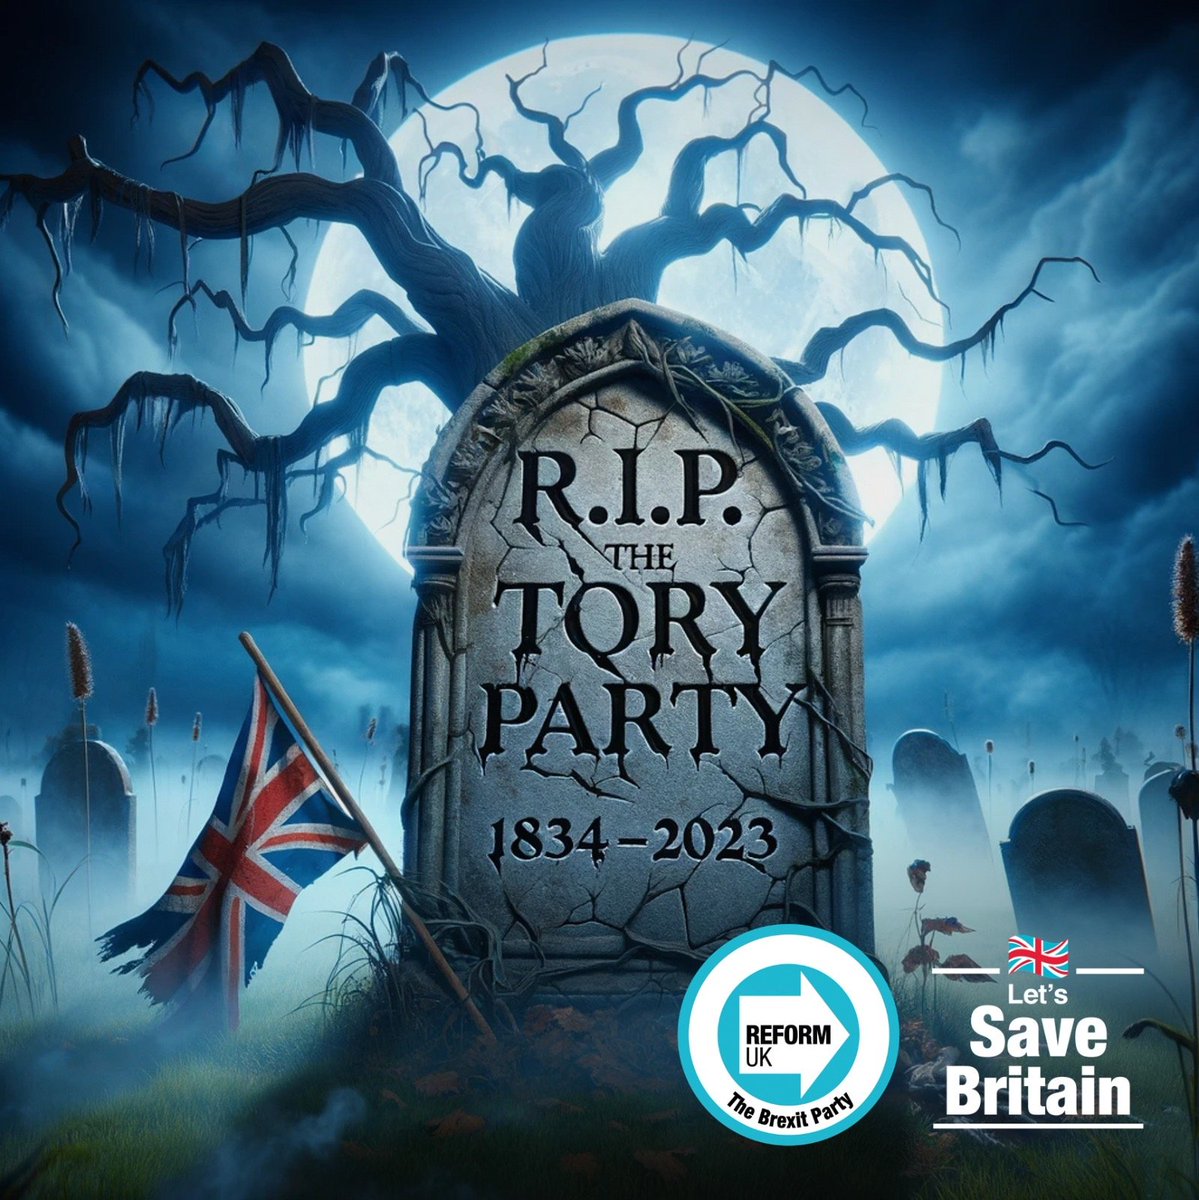 @TiceRichard Well said Richard Tice. Why would the Conservatives believe the British people are mad enough to vote Tory again? Arrogance/entitlement/woke blame culture 'It ain't me gove'